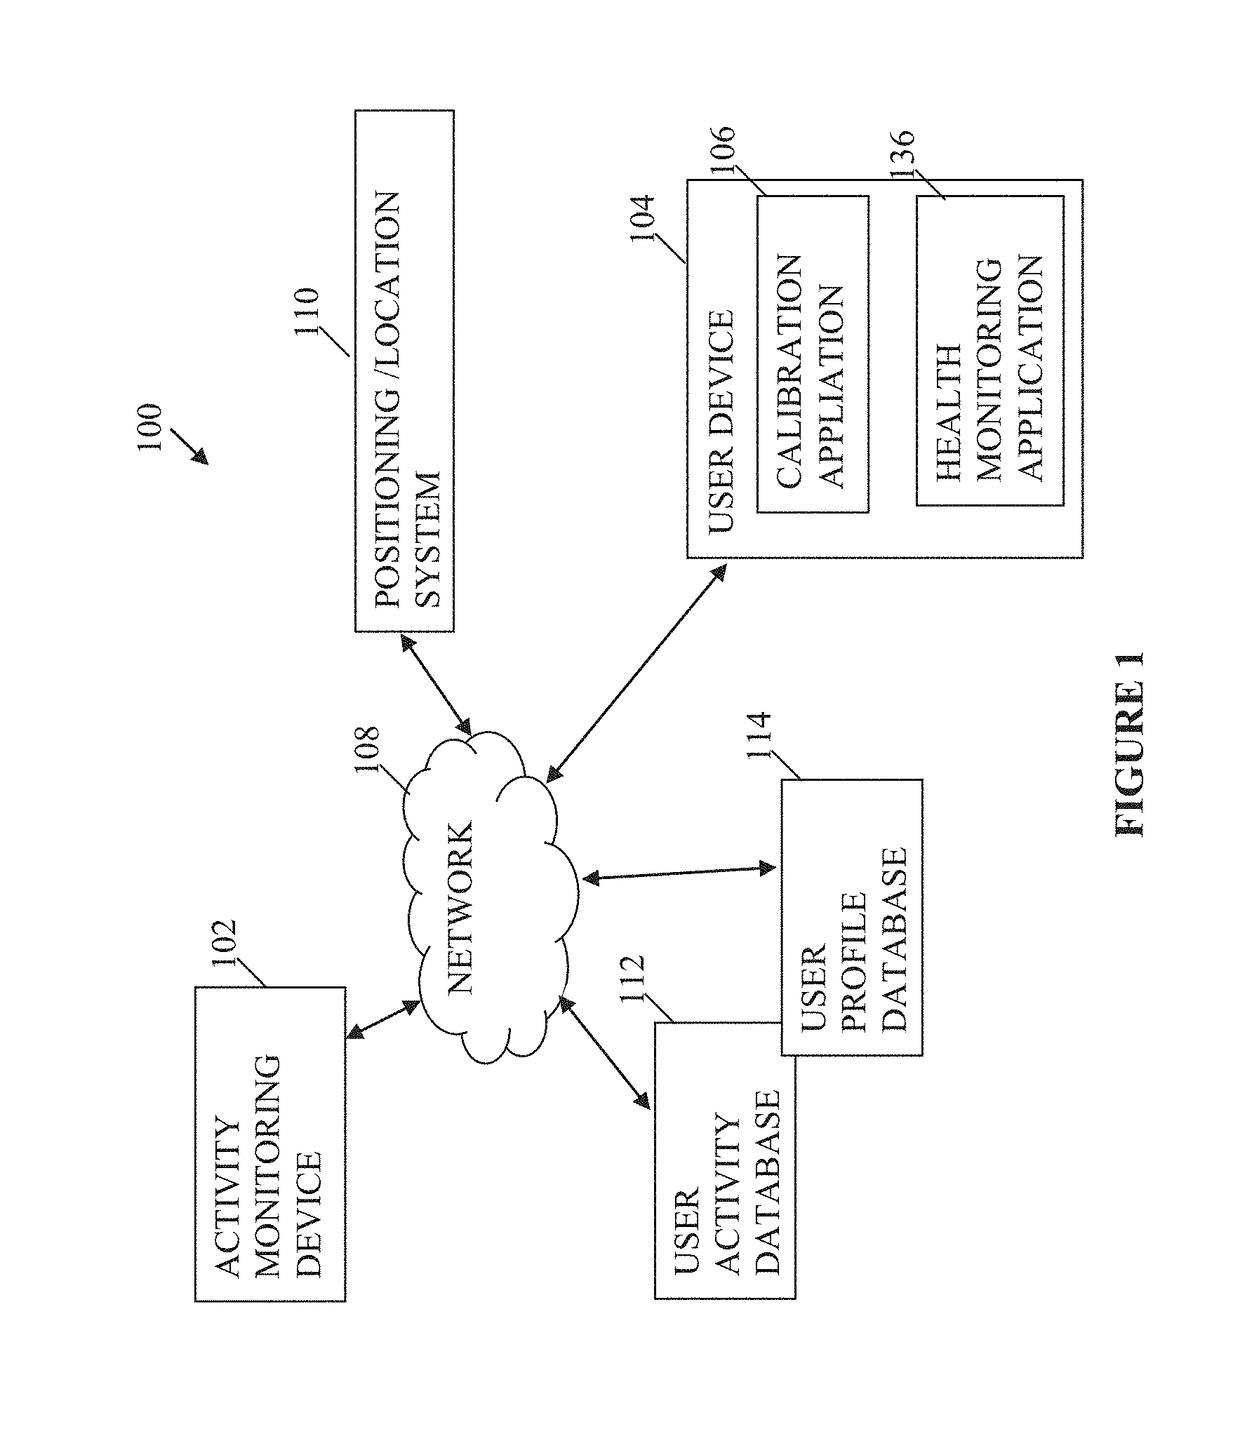 Method and Apparatus for Determining, Recommending, and Applying a Calibration Parameter for Activity Measurement